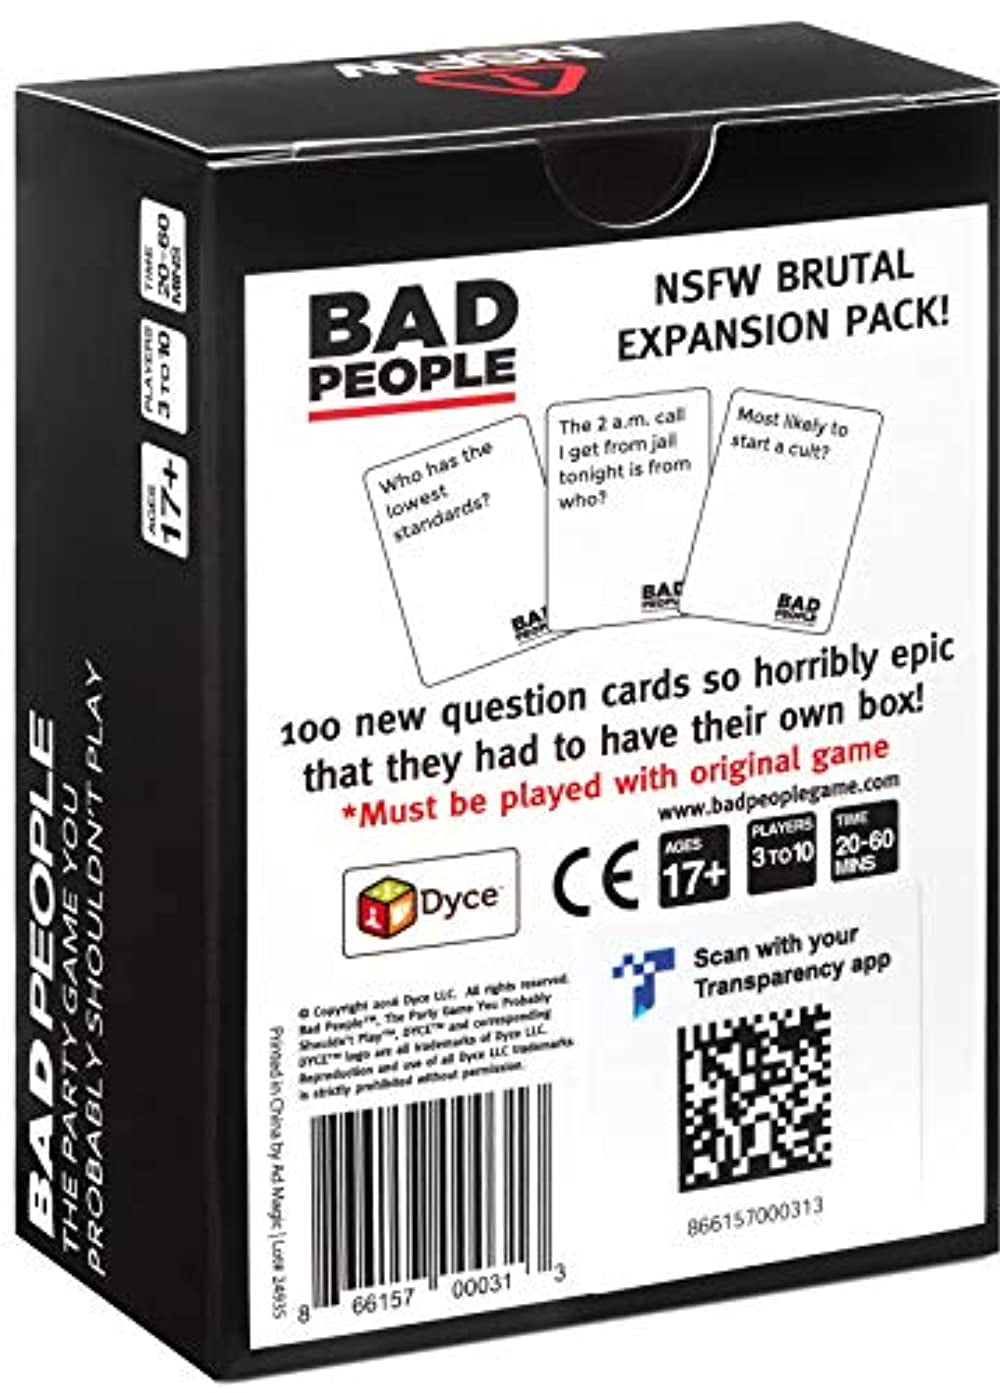 The Adult Party Game BAD PEOPLE The NSFW Brutal Expansion Pack 